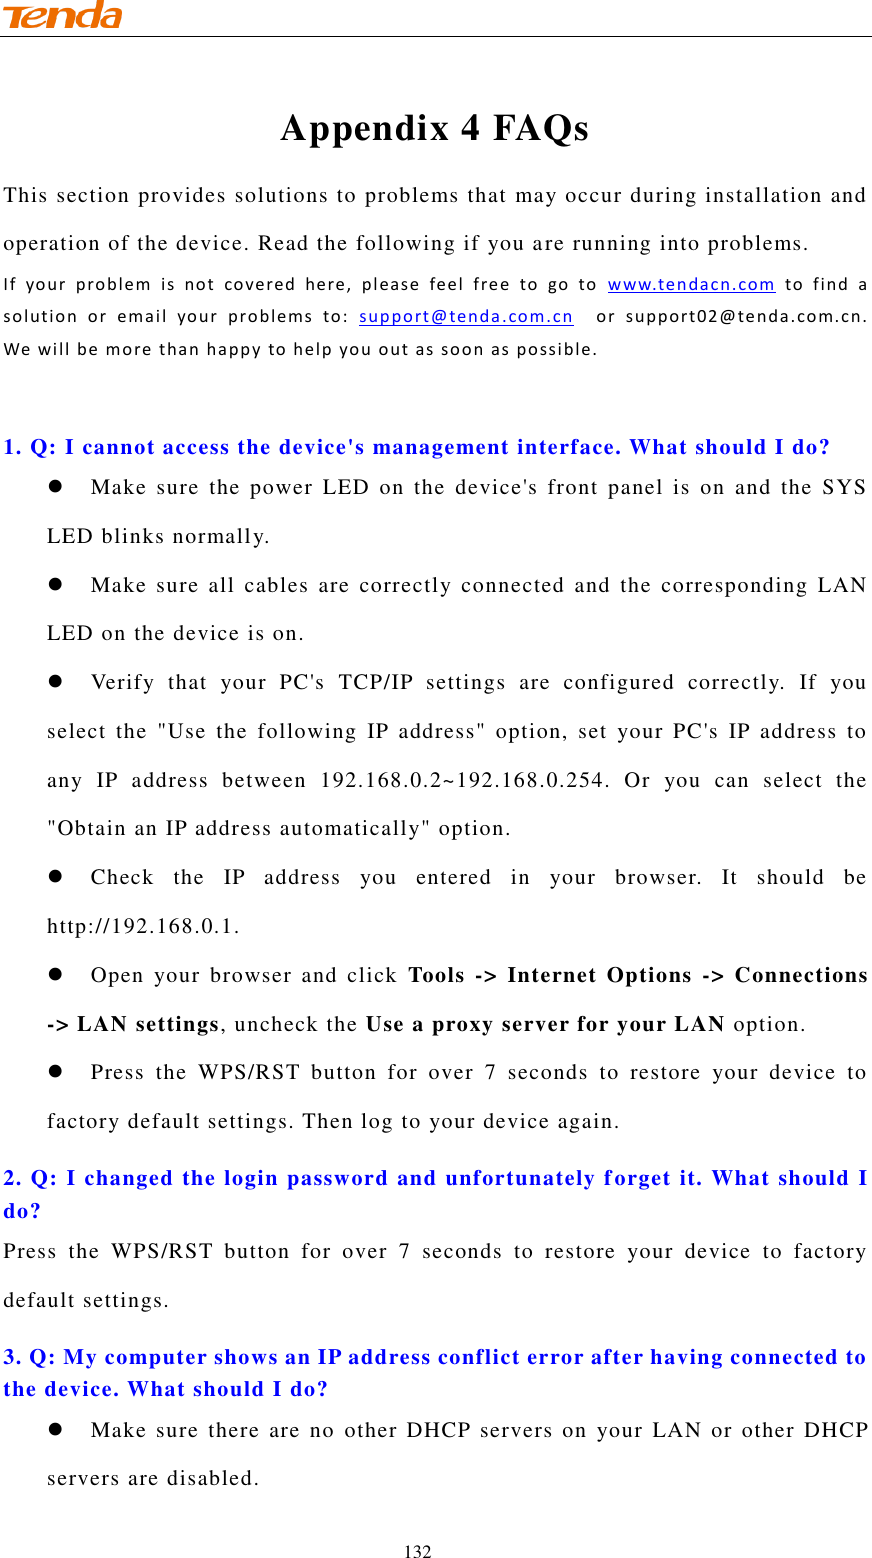                                    132 Appendix 4 FAQs This section provides solutions to problems that may occur during installation and operation of the device. Read the following if you are running into problems.   If  yo ur  pro blem  is  no t  covered  he re ,   pl eas e  feel  fre e  to  go  to  www. te n da c n. co m   to  f i nd  a  sol u tion  or  em a il  your  pro blems   to:  suppo rt@tenda .com . cn    o r  su pport 02 @tenda .com.c n. We w ill  be mo re tha n  happ y to h e lp you  out  as soo n as p o ssi ble.   1. Q: I cannot access the device&apos;s management interface. What should I do?   Make  sure  the  power  LED  on  the  device&apos;s  front  panel  is  on  and  the  SYS LED blinks normally.  Make  sure all  cables are correctly  connected  and  the corresponding  LAN LED on the device is on.  Verify  that  your  PC&apos;s  TCP/IP  settings  are  configured  correctly.  If  you select  the  &quot;Use  the  following  IP  address&quot;  option,  set  your  PC&apos;s  IP  address  to any  IP  address  between  192.168.0.2~192.168.0.254.  Or  you  can  select  the &quot;Obtain an IP address automatically&quot; option.  Check  the  IP  address  you  entered  in  your  browser.  It  should  be http://192.168.0.1.  Open  your  browser  and  click  Tools  -&gt;  Internet Options  -&gt; Connections -&gt; LAN settings, uncheck the Use a proxy server for your LAN option.    Press  the  WPS/RST  button  for  over  7  seconds  to  restore  your  device  to factory default settings. Then log to your device again.  2. Q: I changed the login password and unfortunately forget it. What should I do? Press  the  WPS/RST  button  for  over  7  seconds  to  restore  your  device  to  factory default settings. 3. Q: My computer shows an IP address conflict error after having connected to the device. What should I do?  Make  sure  there are  no  other  DHCP  servers on  your  LAN or  other  DHCP servers are disabled. 